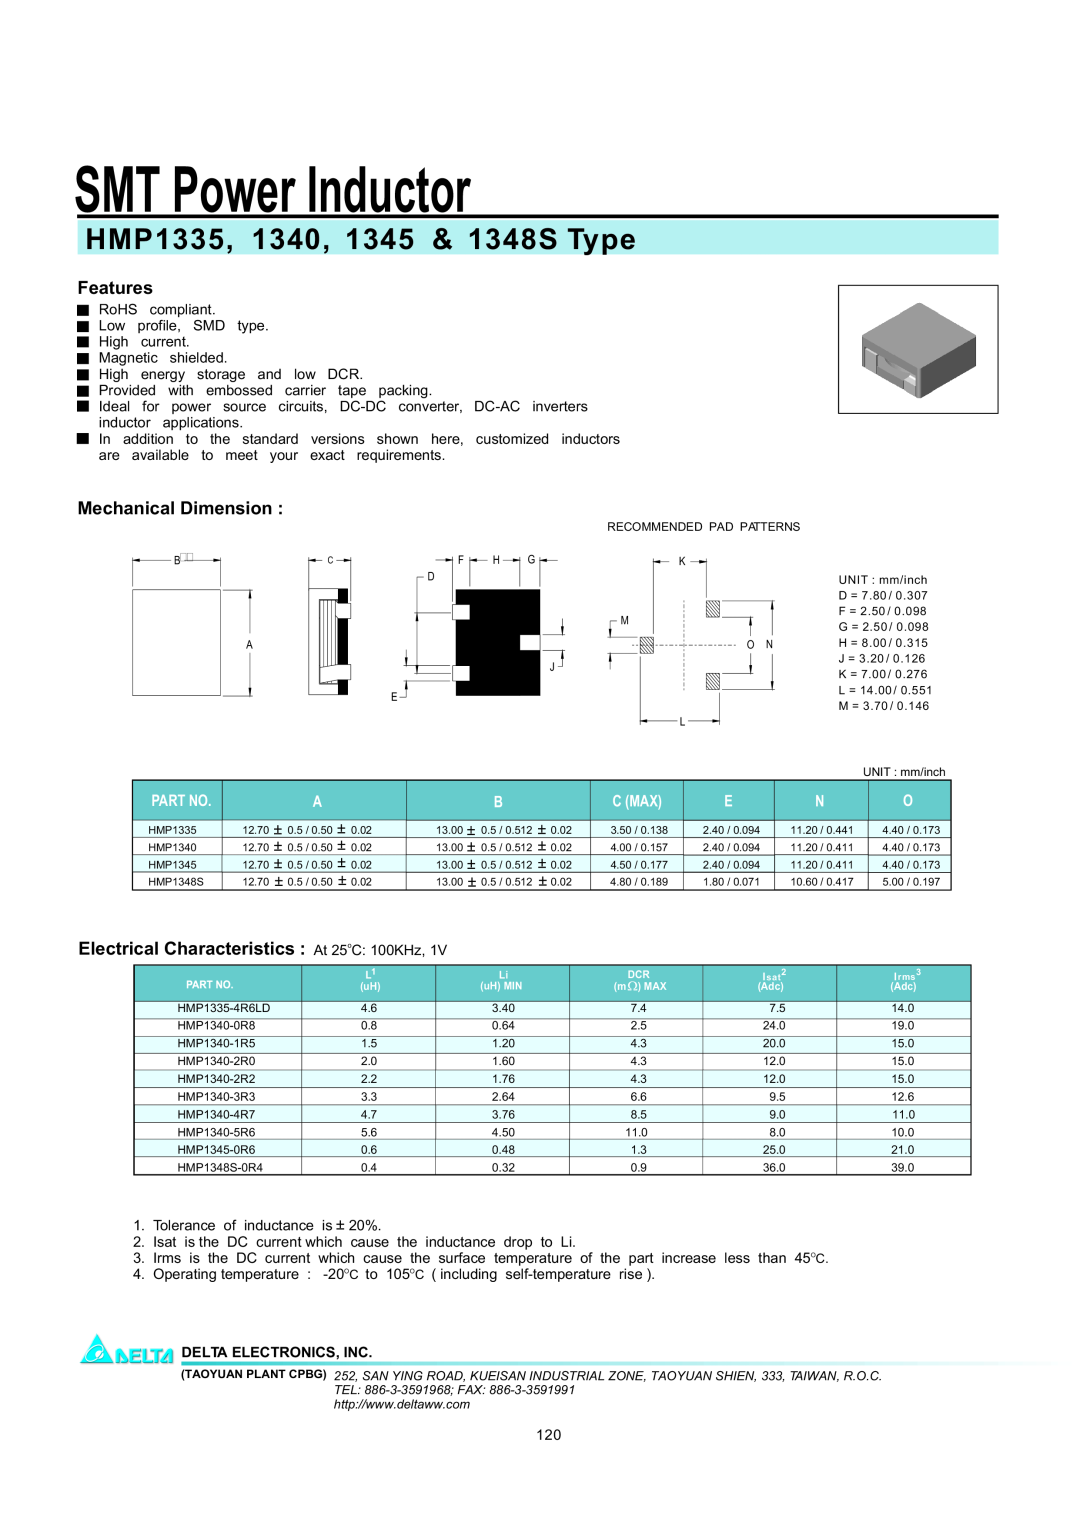 Delta Electronics manual SMT Power Inductor, HMP1335, 1340, 1345 & 1348S Type, Features, Mechanical Dimension, C Max 